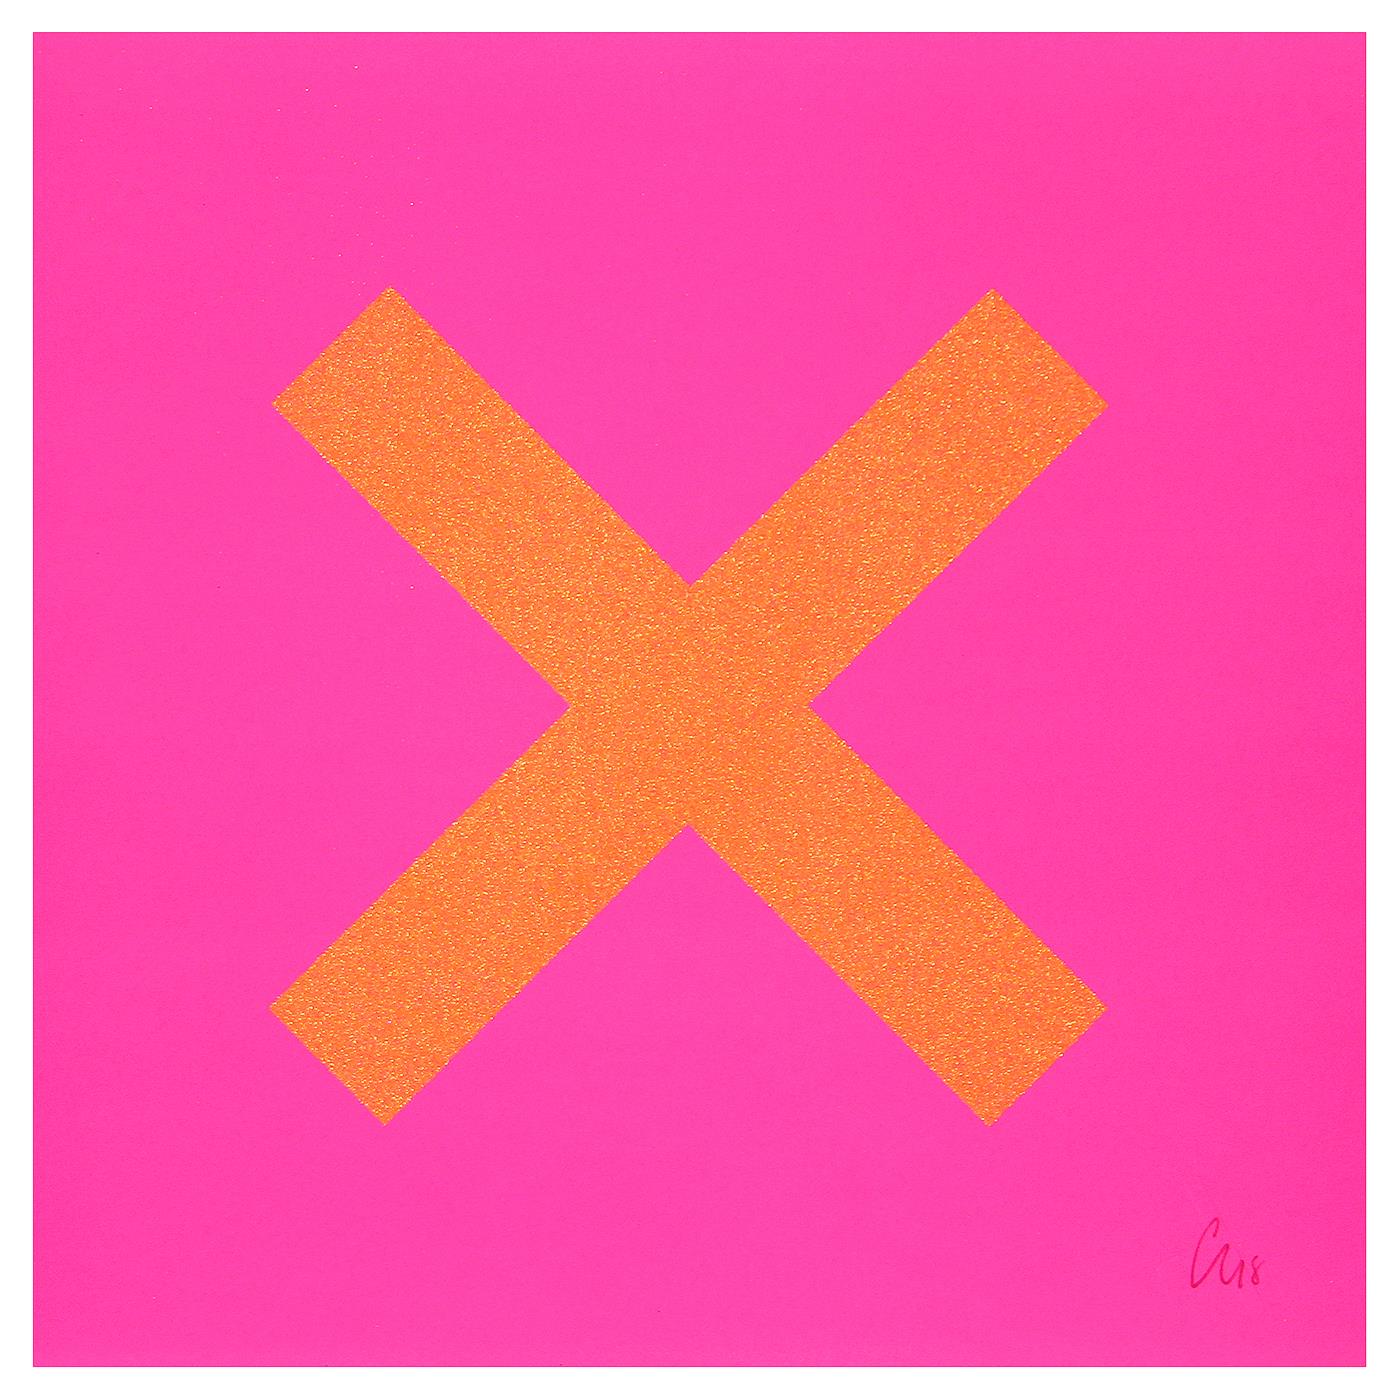 West Contemporary Editions - Buy X Marks The Spot (Orange on Pink